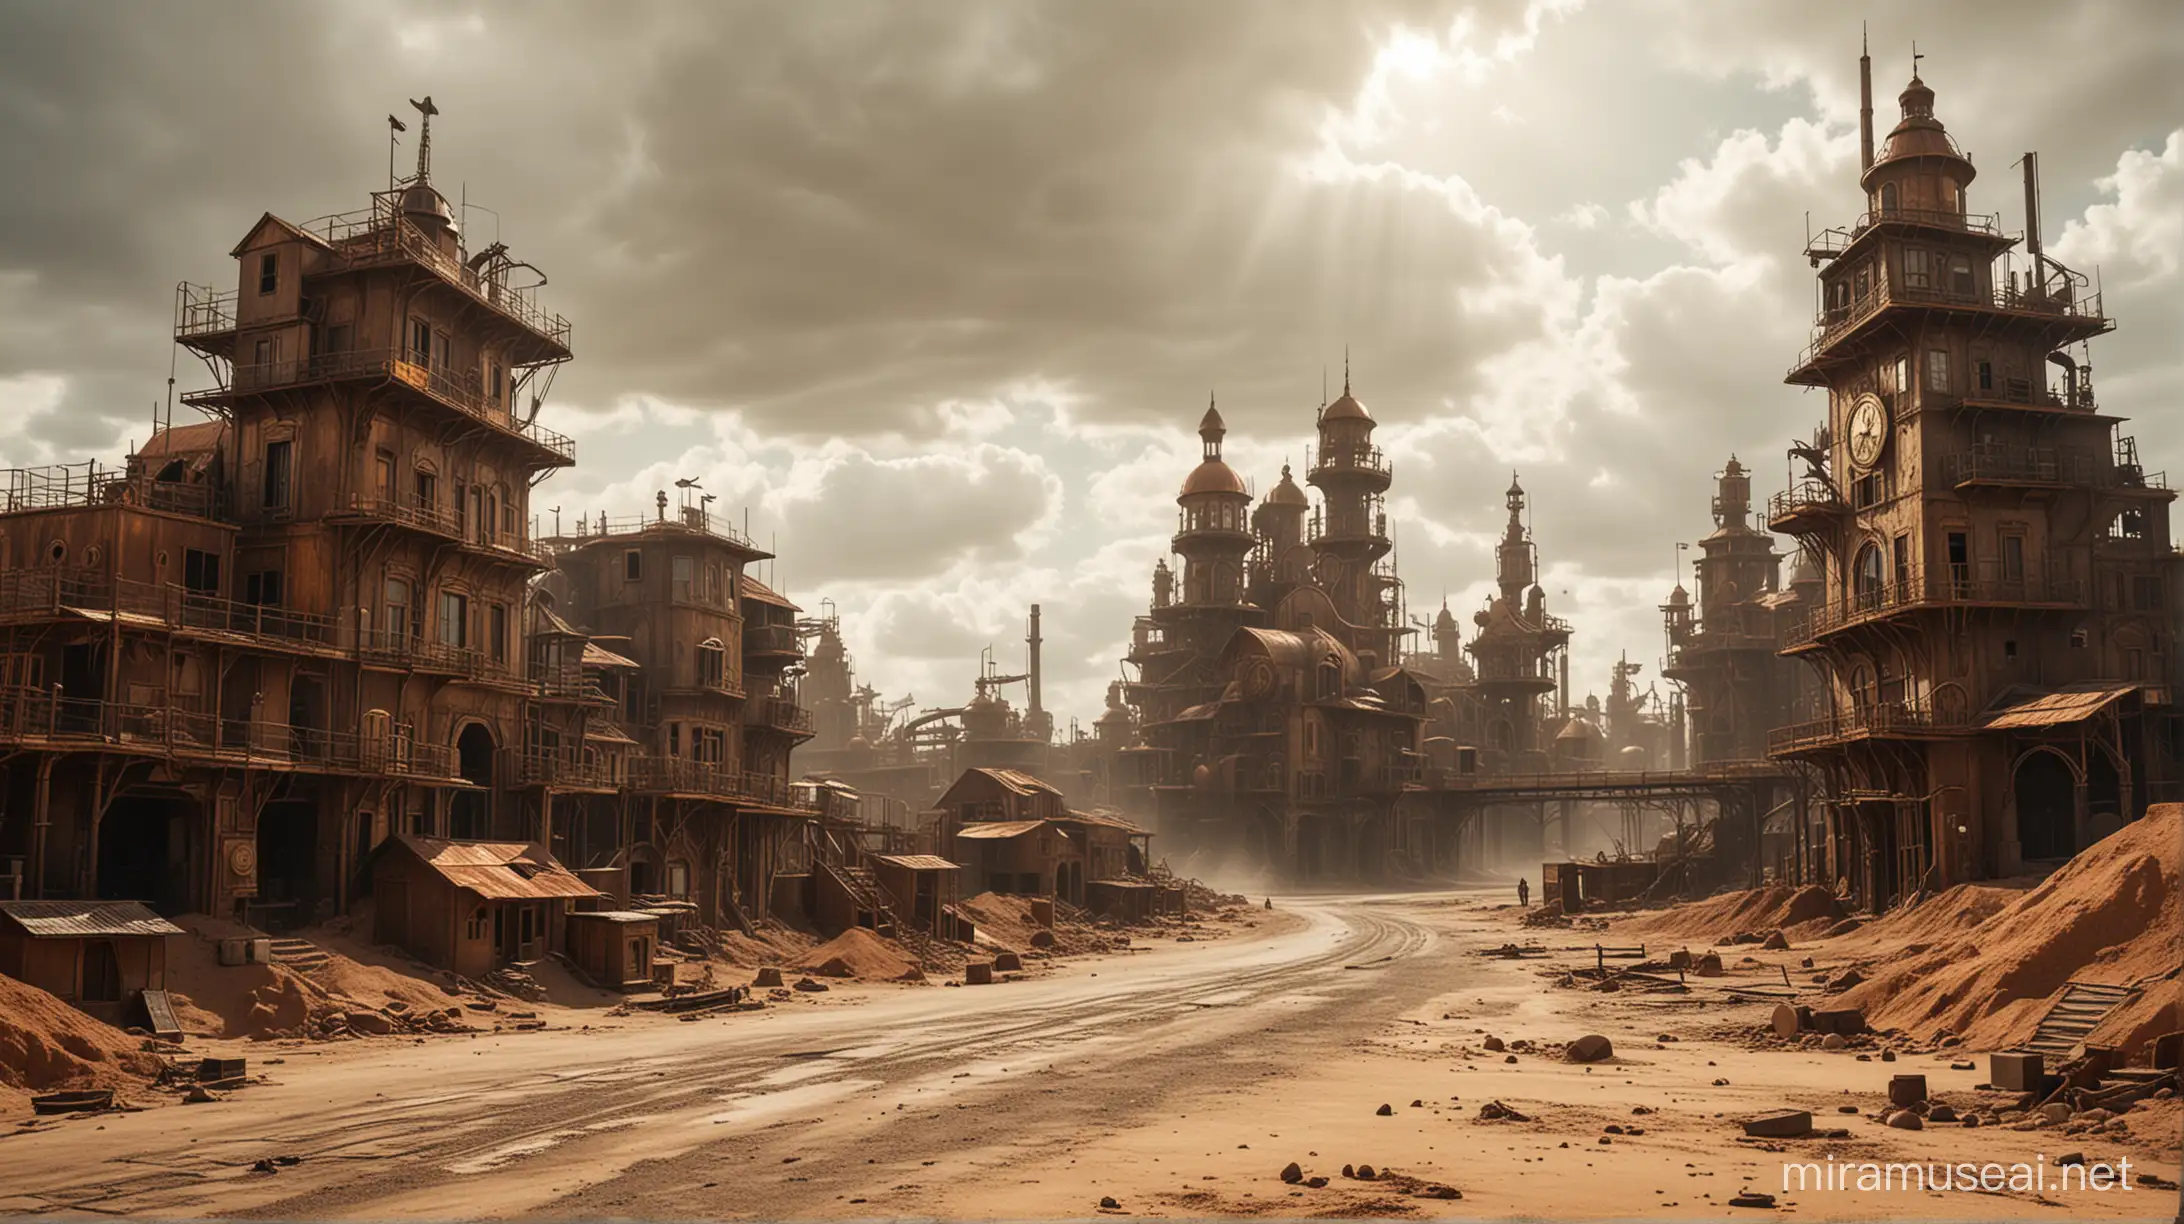 abandoned steampunk city made of copper , gold and glass. much sand and dust. no one is visible. sunny and cloudy.